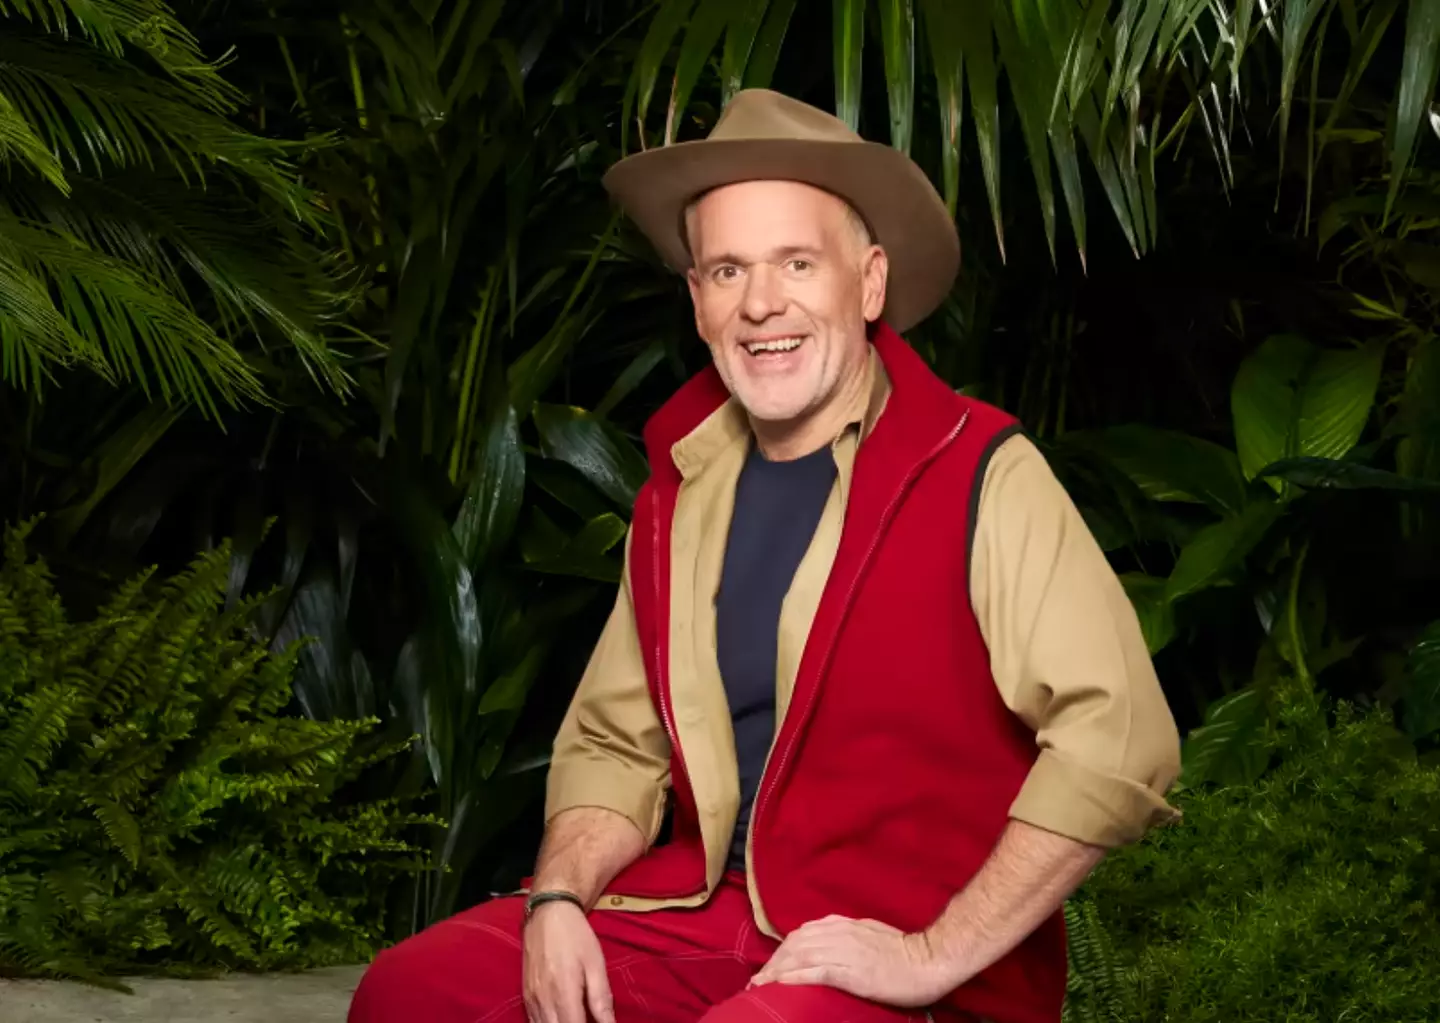 Chris Moyles got off on the wrong foot with I'm A Celebrity viewers.